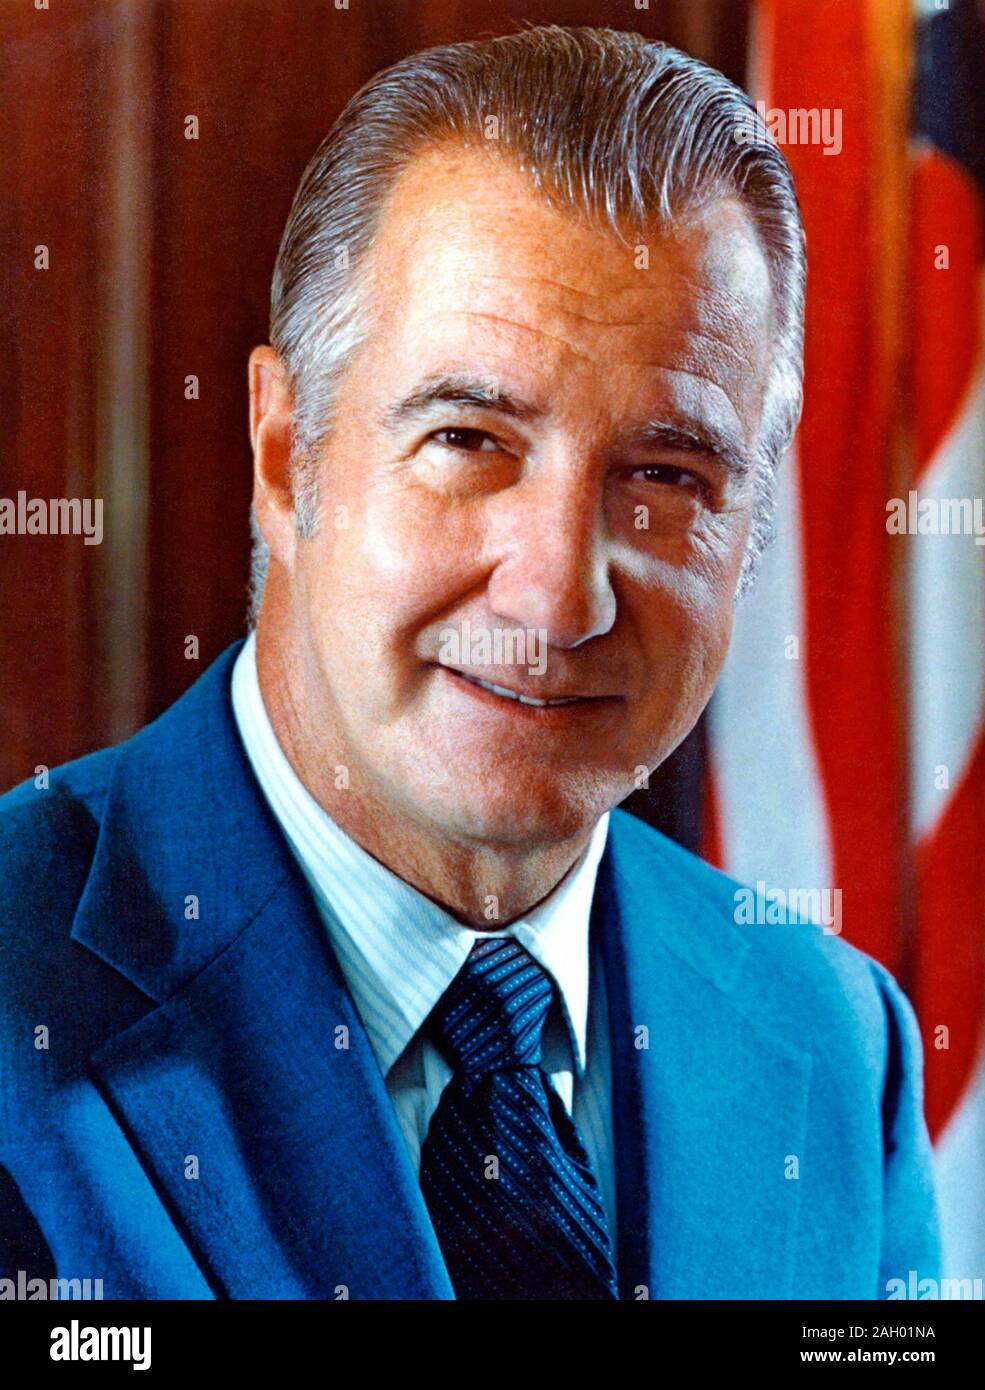 Spiro Agnew, 39th Vice President of the United States and the 55th Governor of Maryland. October, 1972 Stock Photo